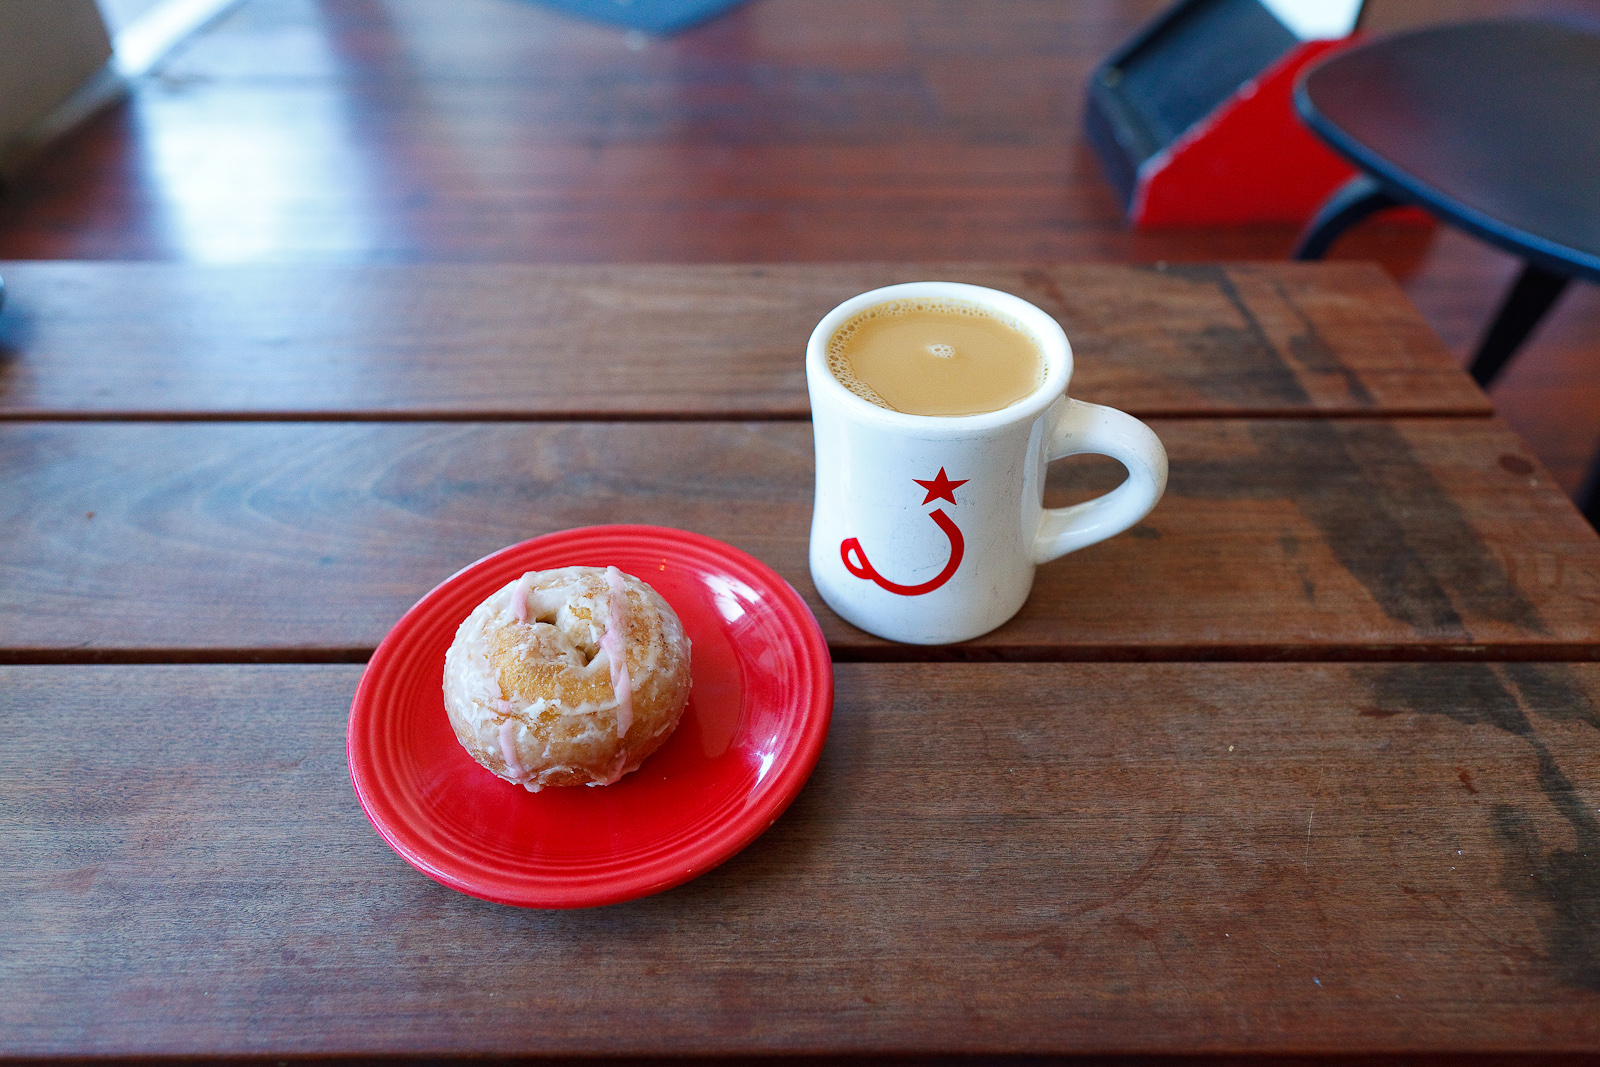 Pour over coffee and a glaze donut from People's Donuts